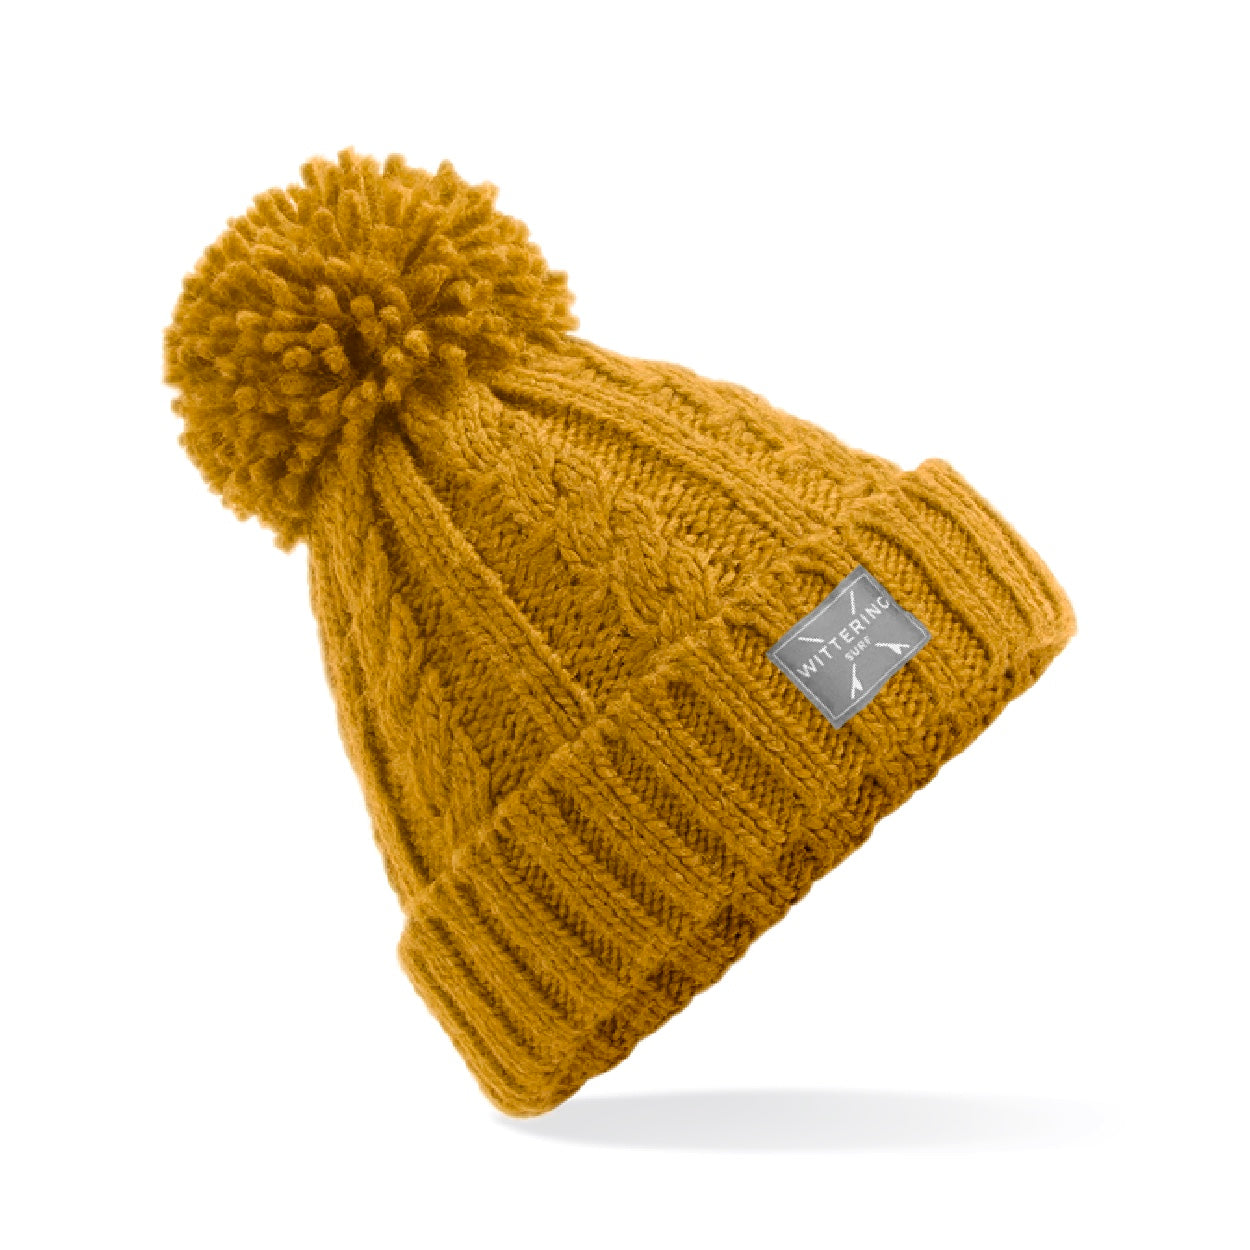 POWDER CHUNKY CABLE KNIT BEANIE - 6 COLOUR OPTIONS.